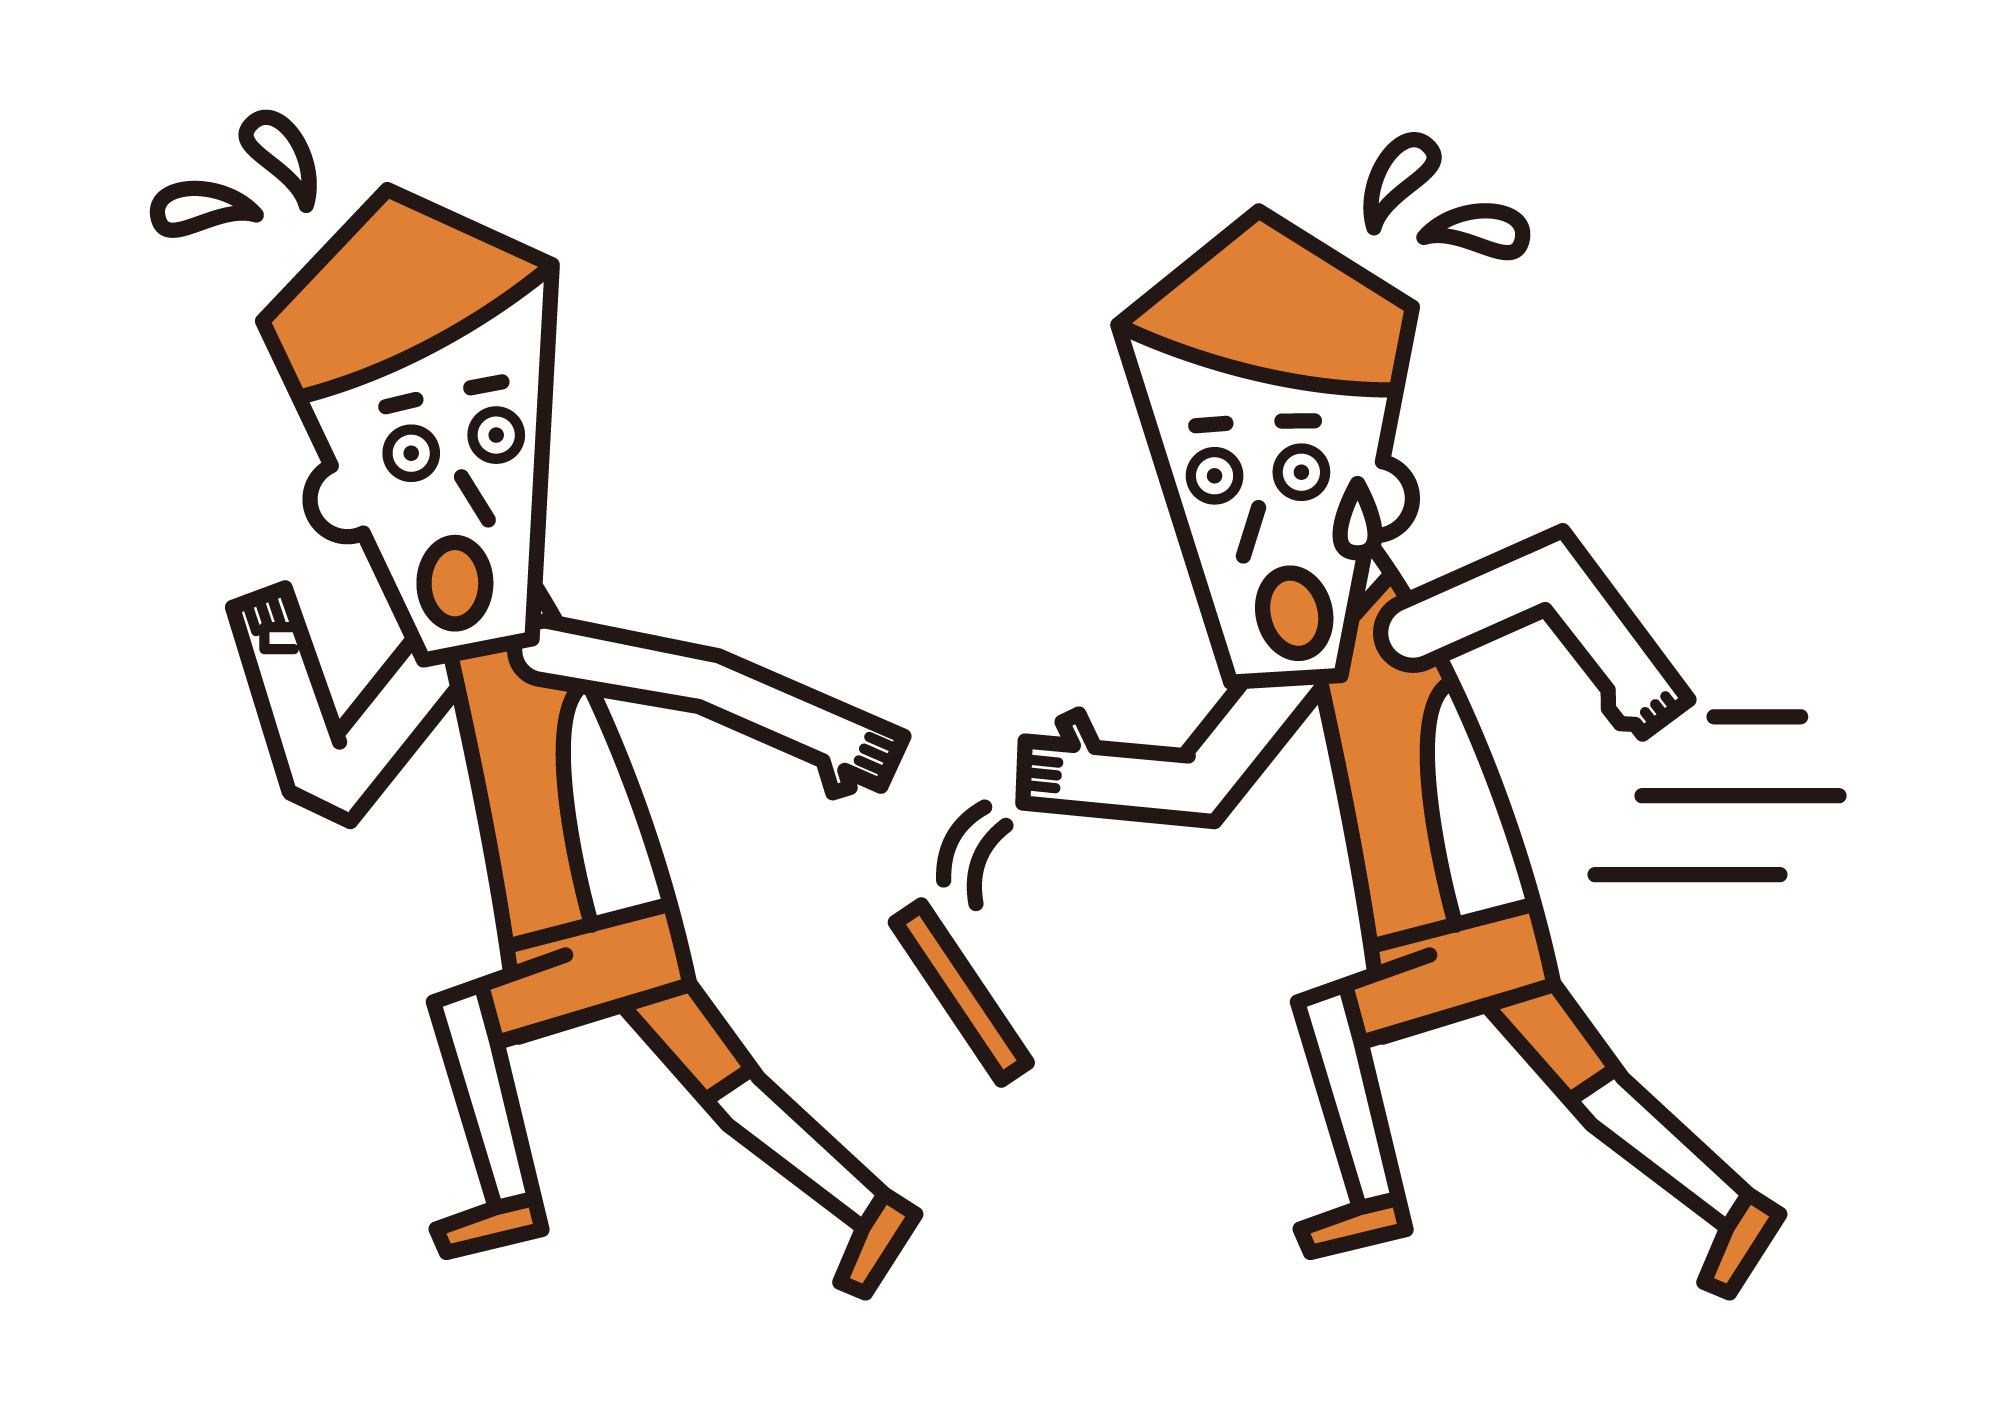 Illustration of a man who fails a baton toss in a relay run